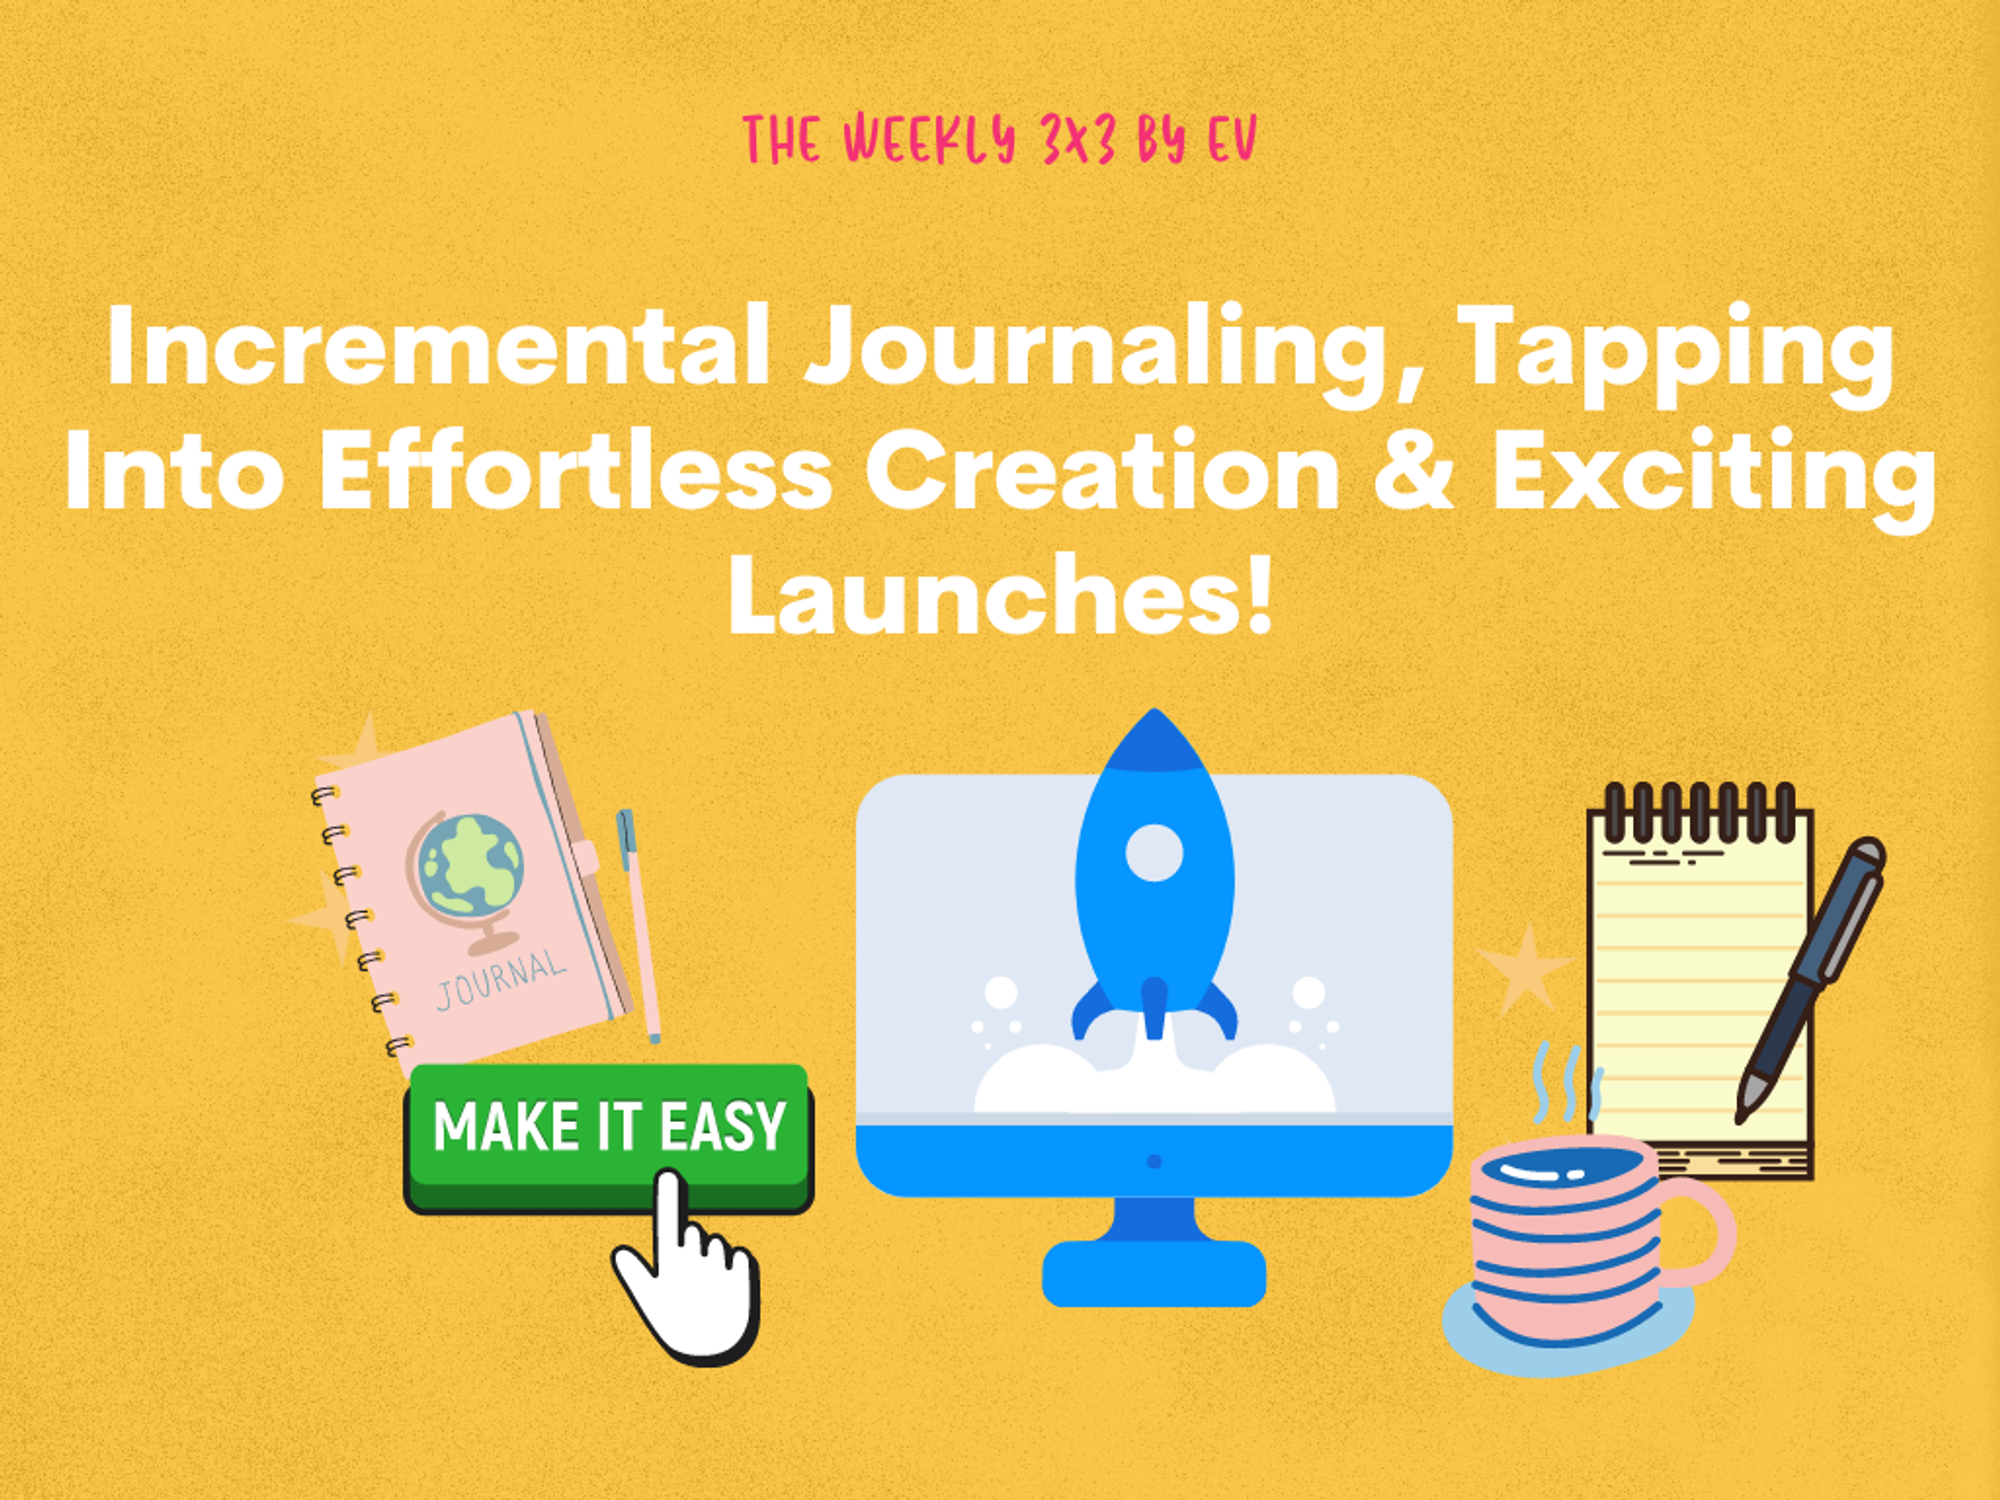 Incremental Journaling, Tapping Into Effortless Creation & Exciting Launches!